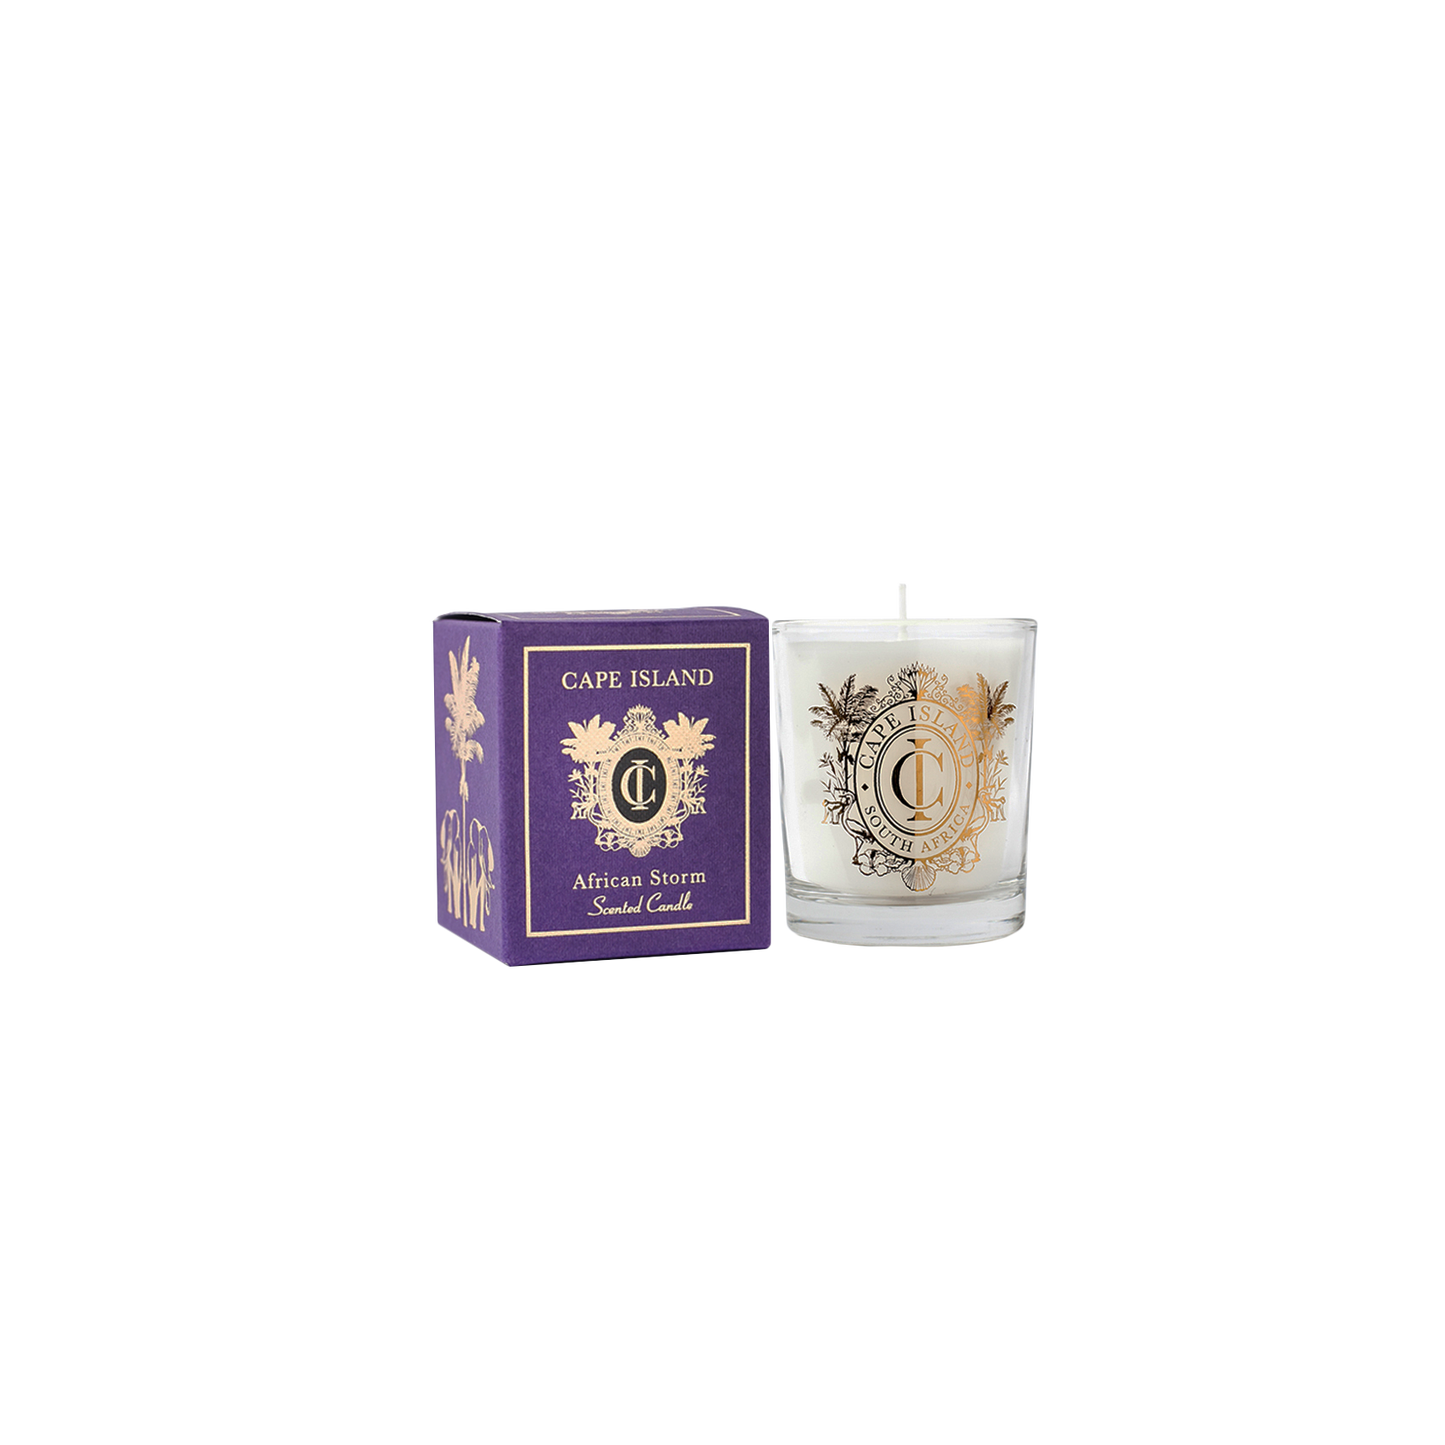 African Storm Scented Candle